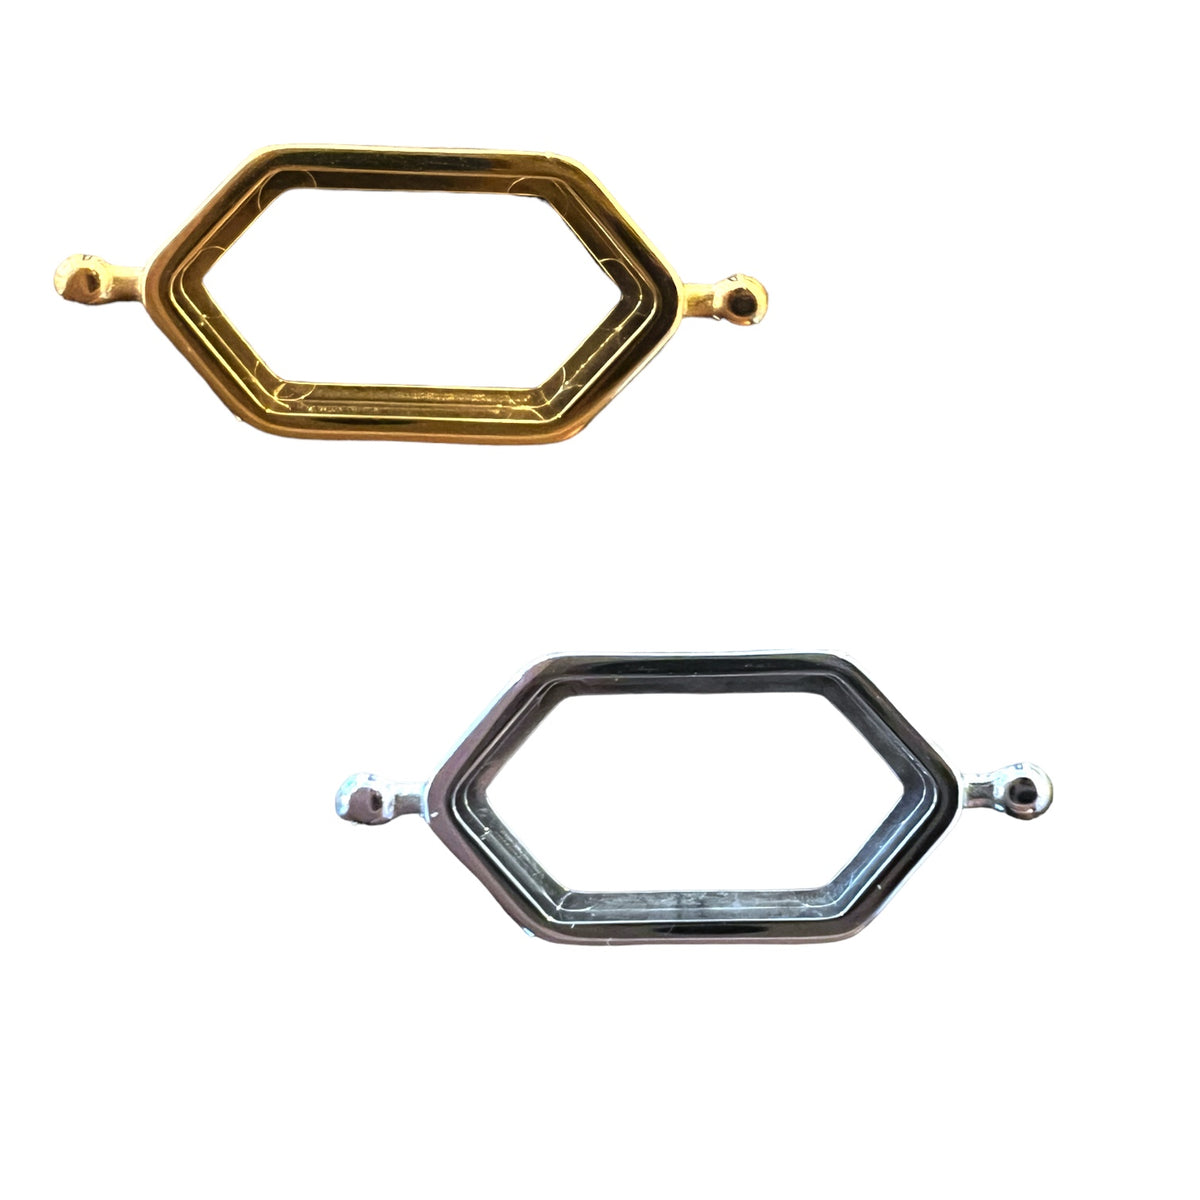 CONQUERing Open Hexbar-Shaped Spinner for DIY - Silver or Gold